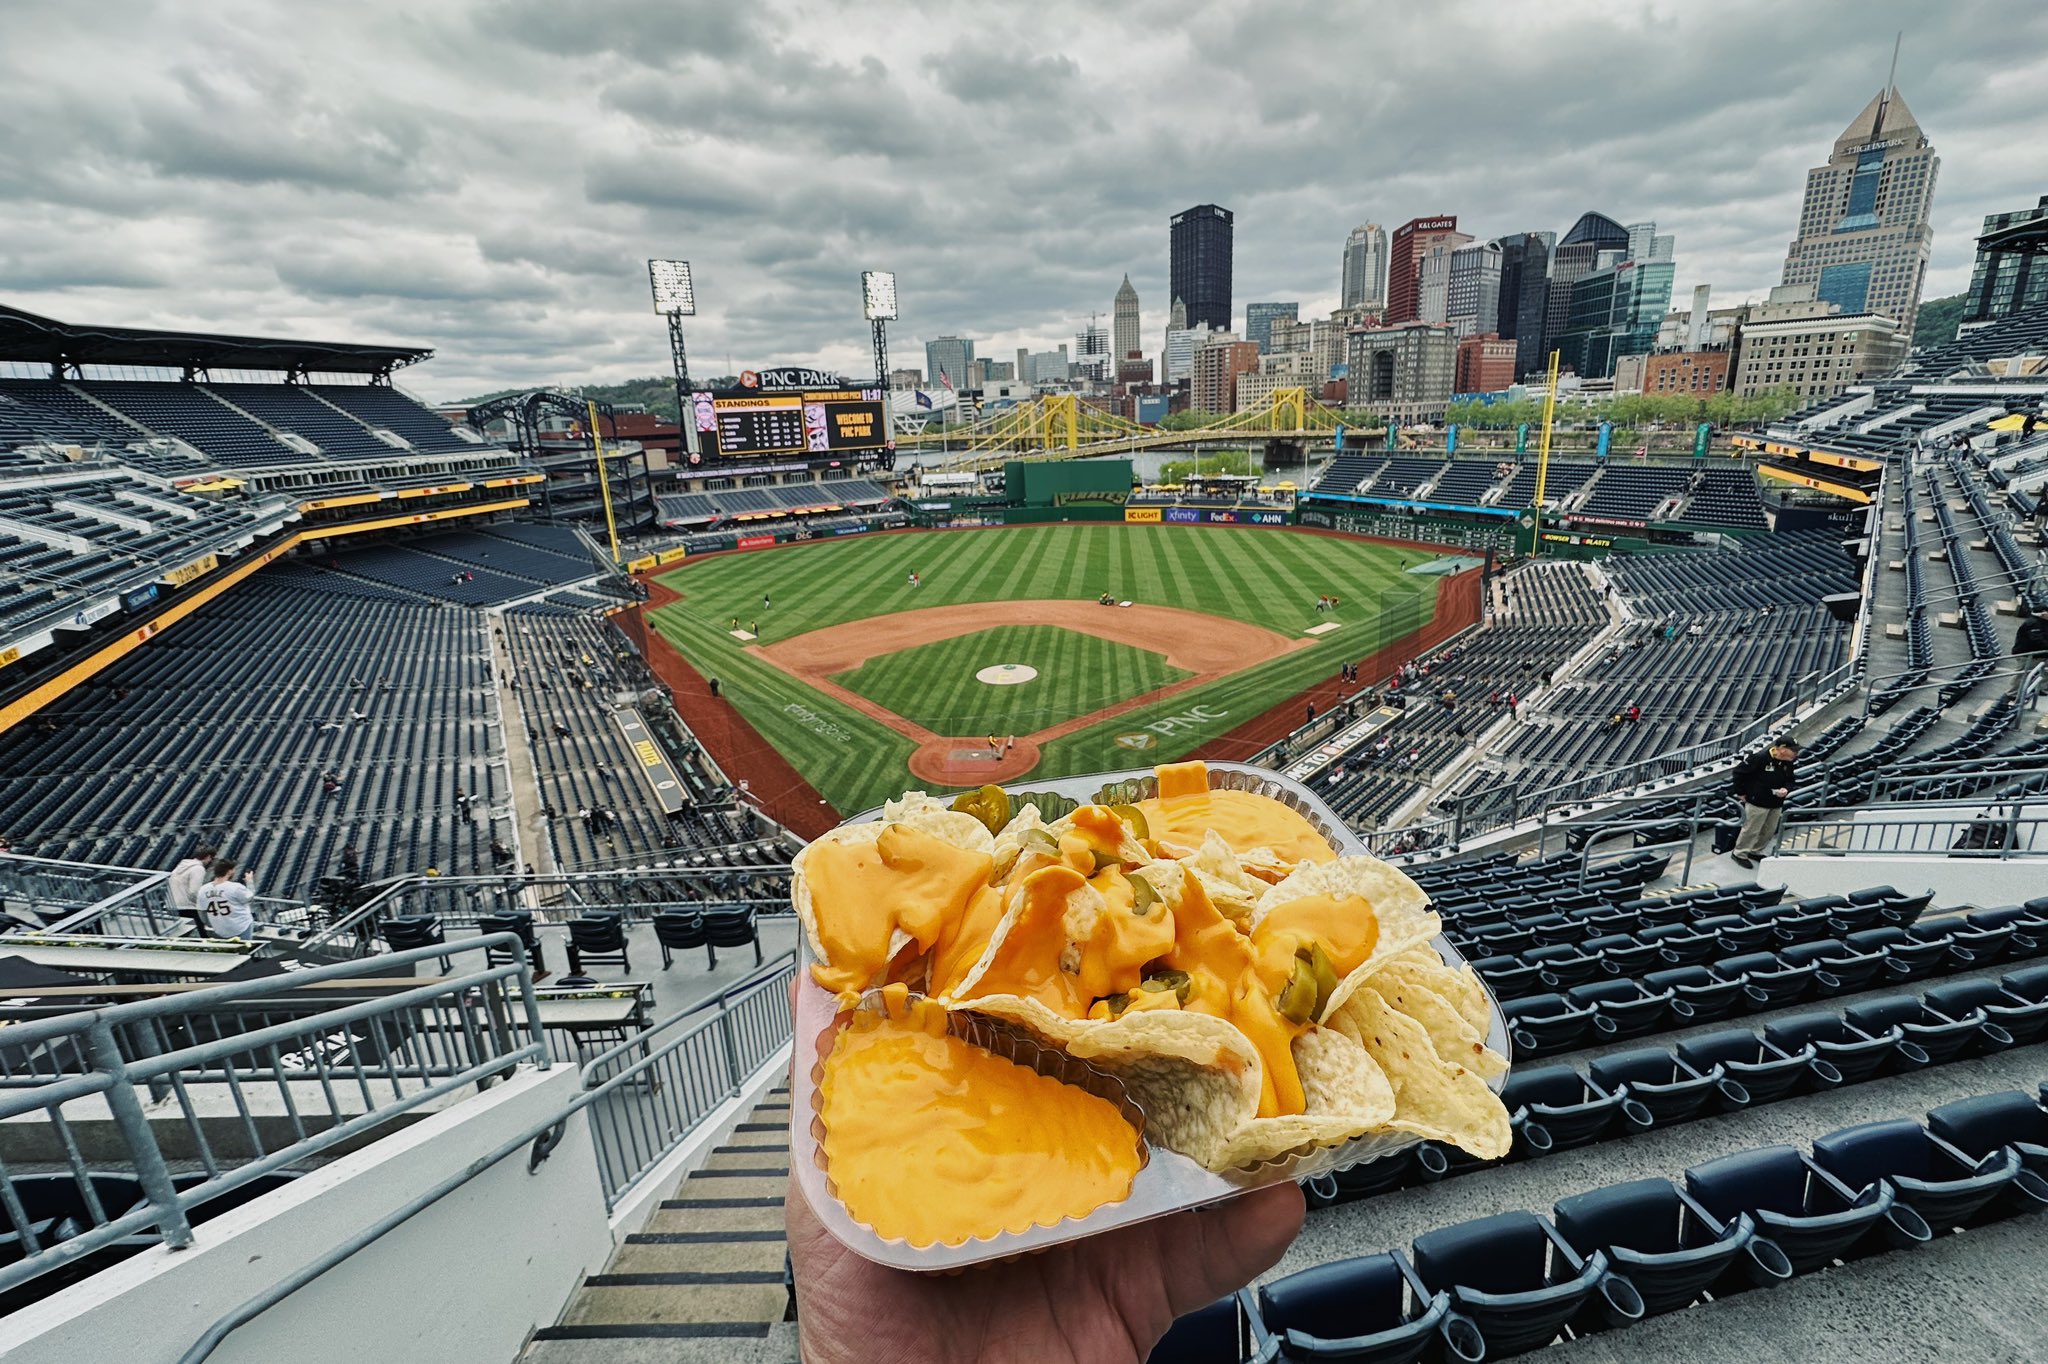 Dave DiCello on X: Obligatory nachos, PNC Park, and #pittsburgh